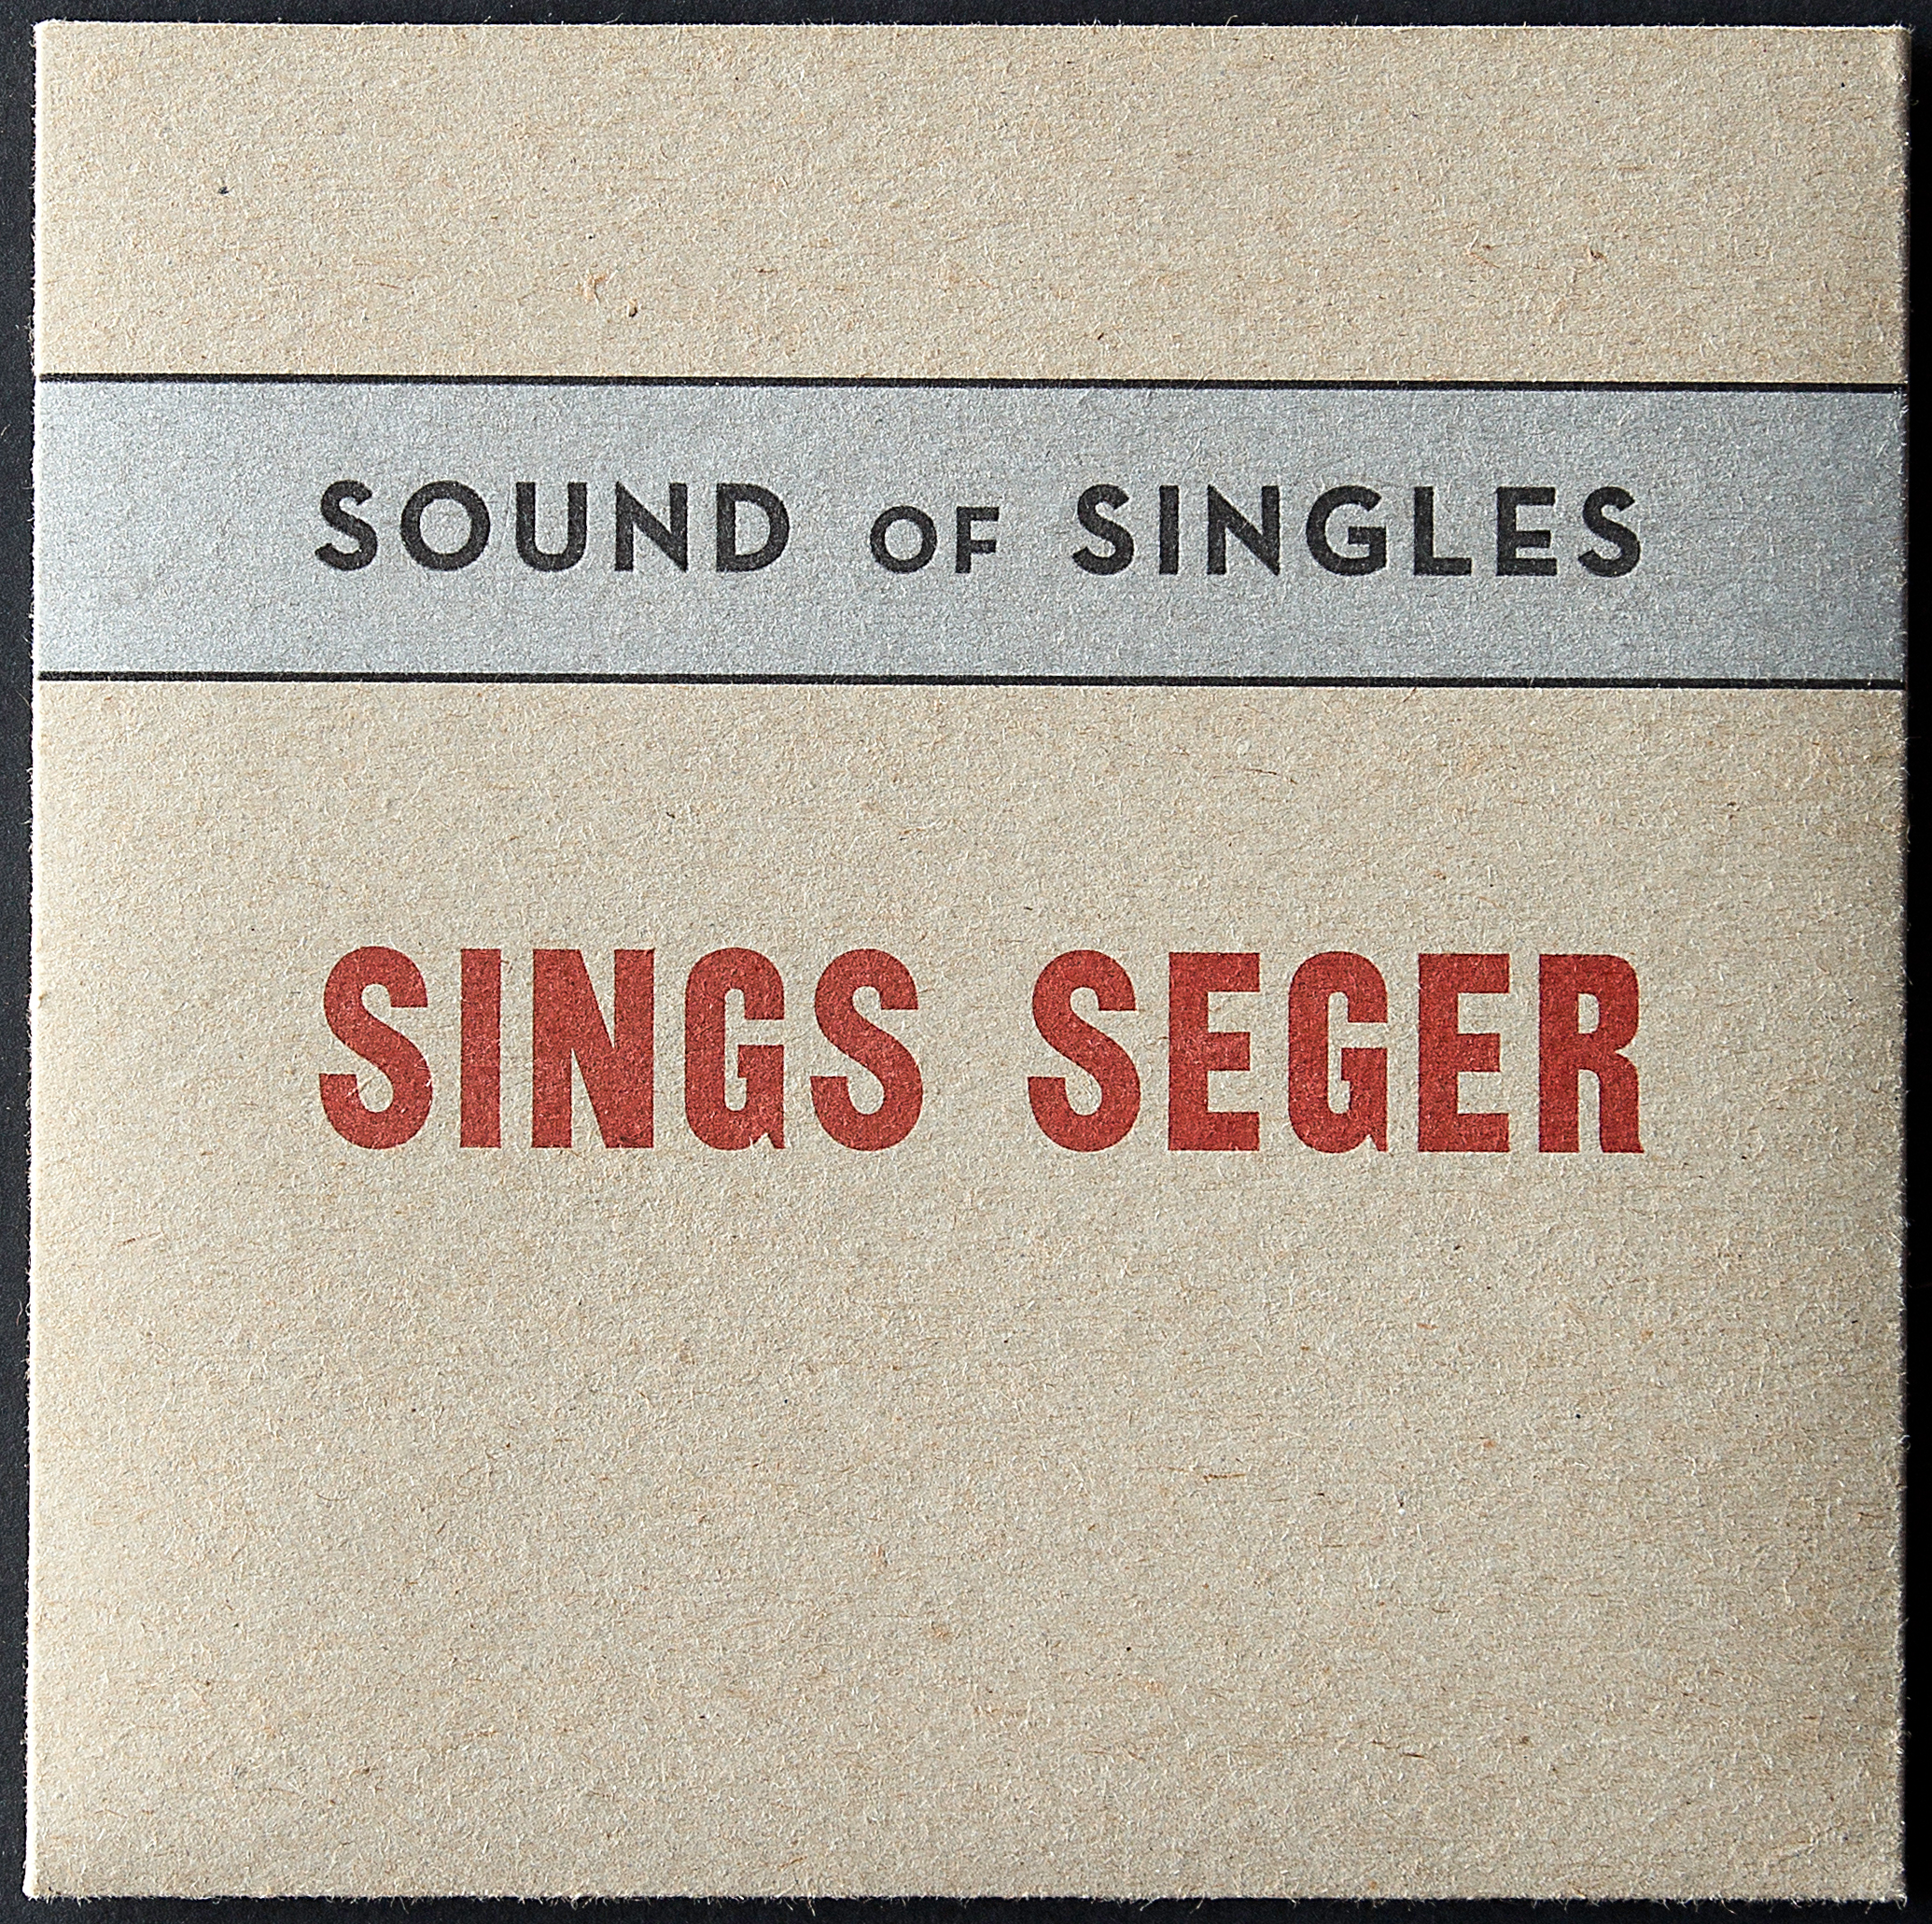  7 inch record. Front cover. Letterpress printed in three colors on 18pt chipboard. 